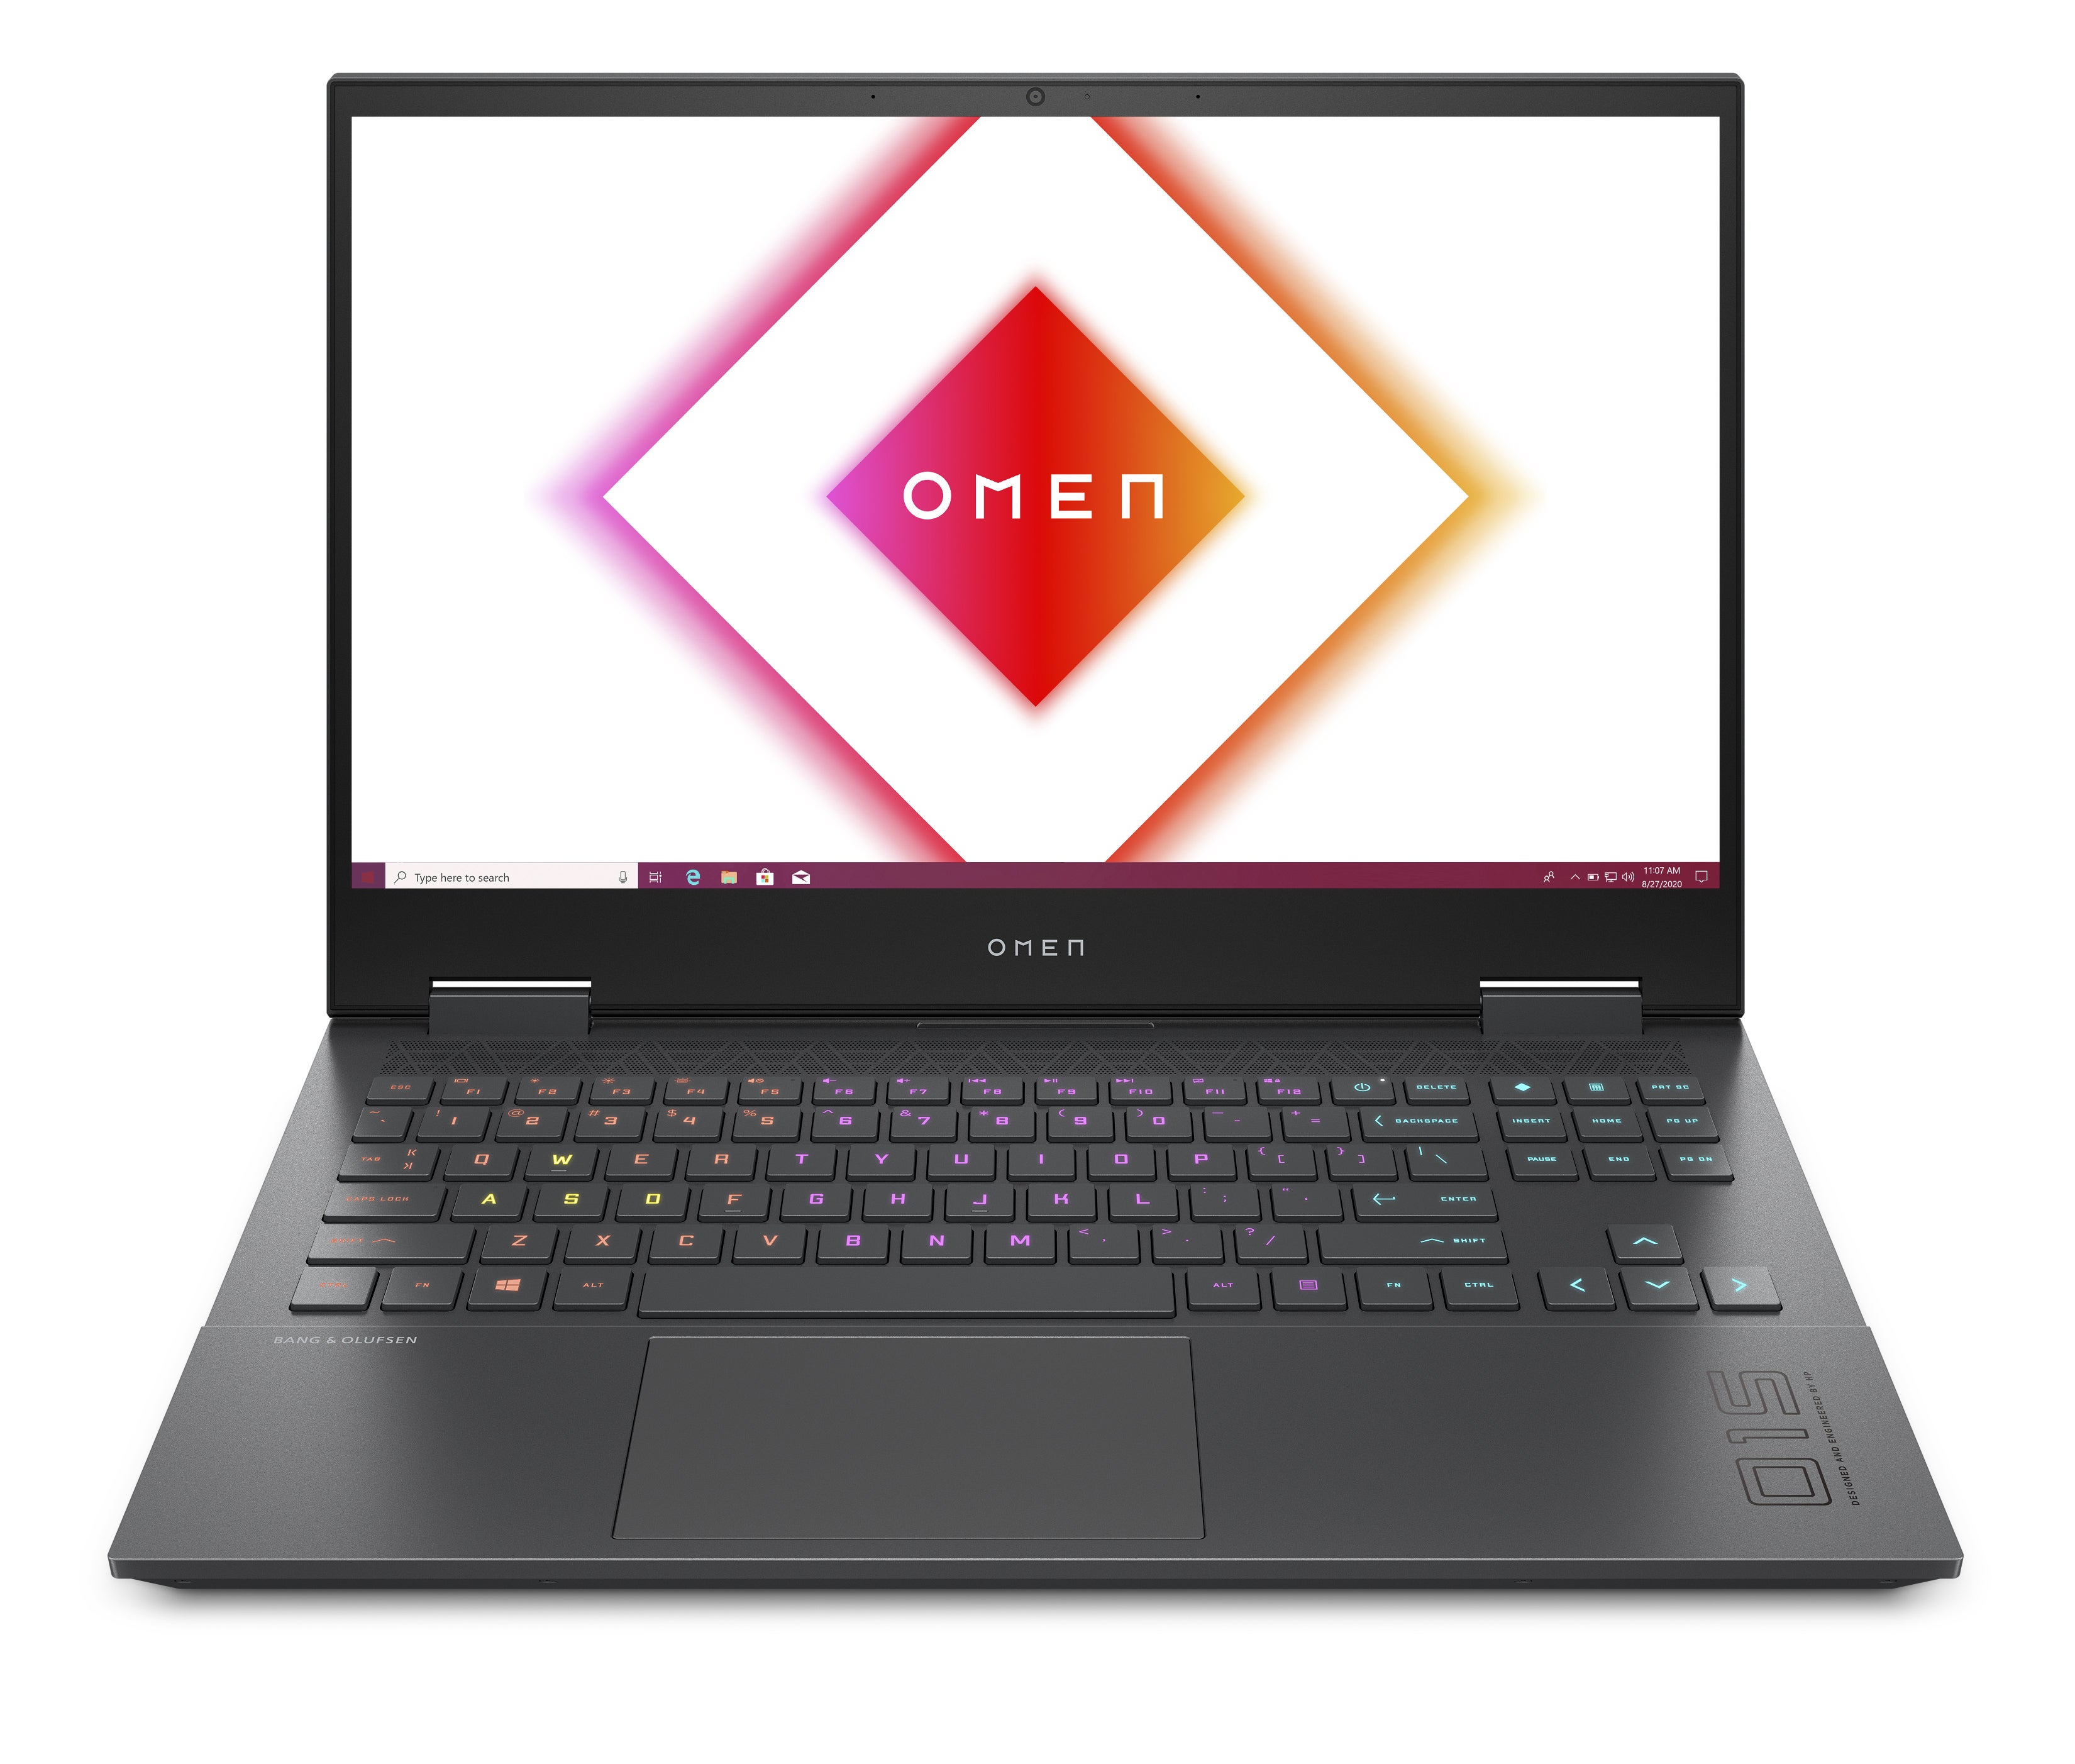 HP Omen 15 gaming laptop Prices, specs and features GameStar